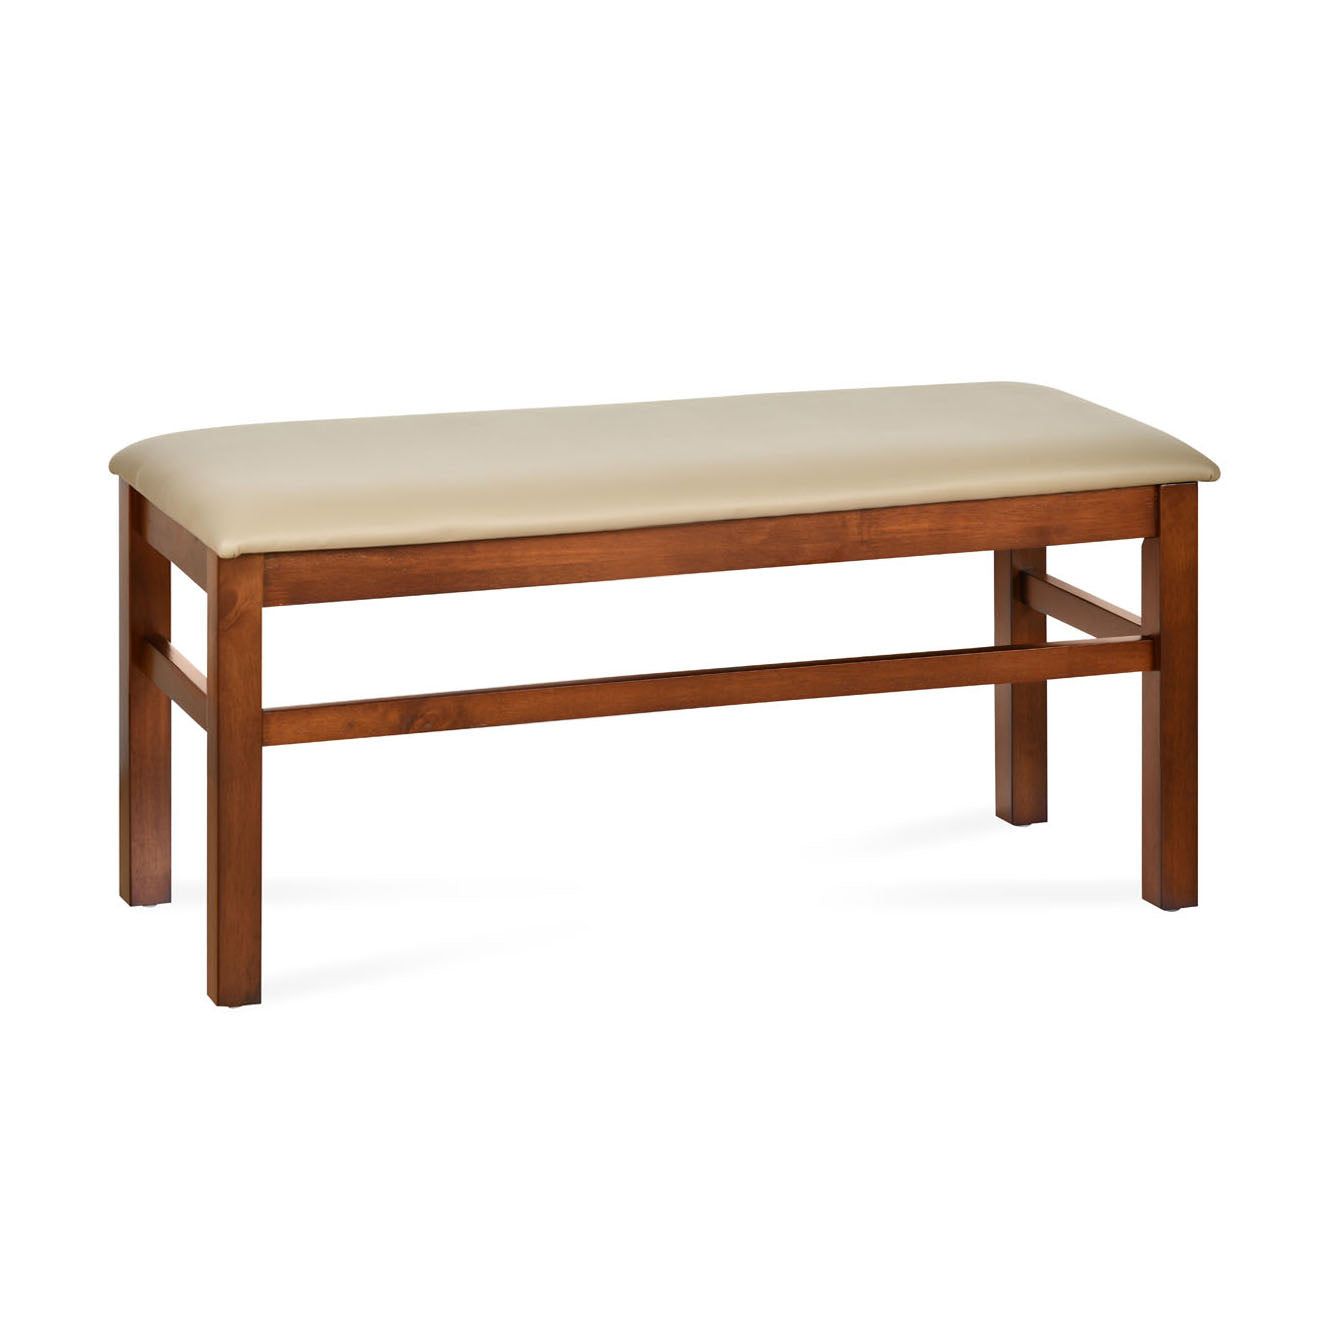 Pearl 4 Seater Dining Bench (Cappucino)